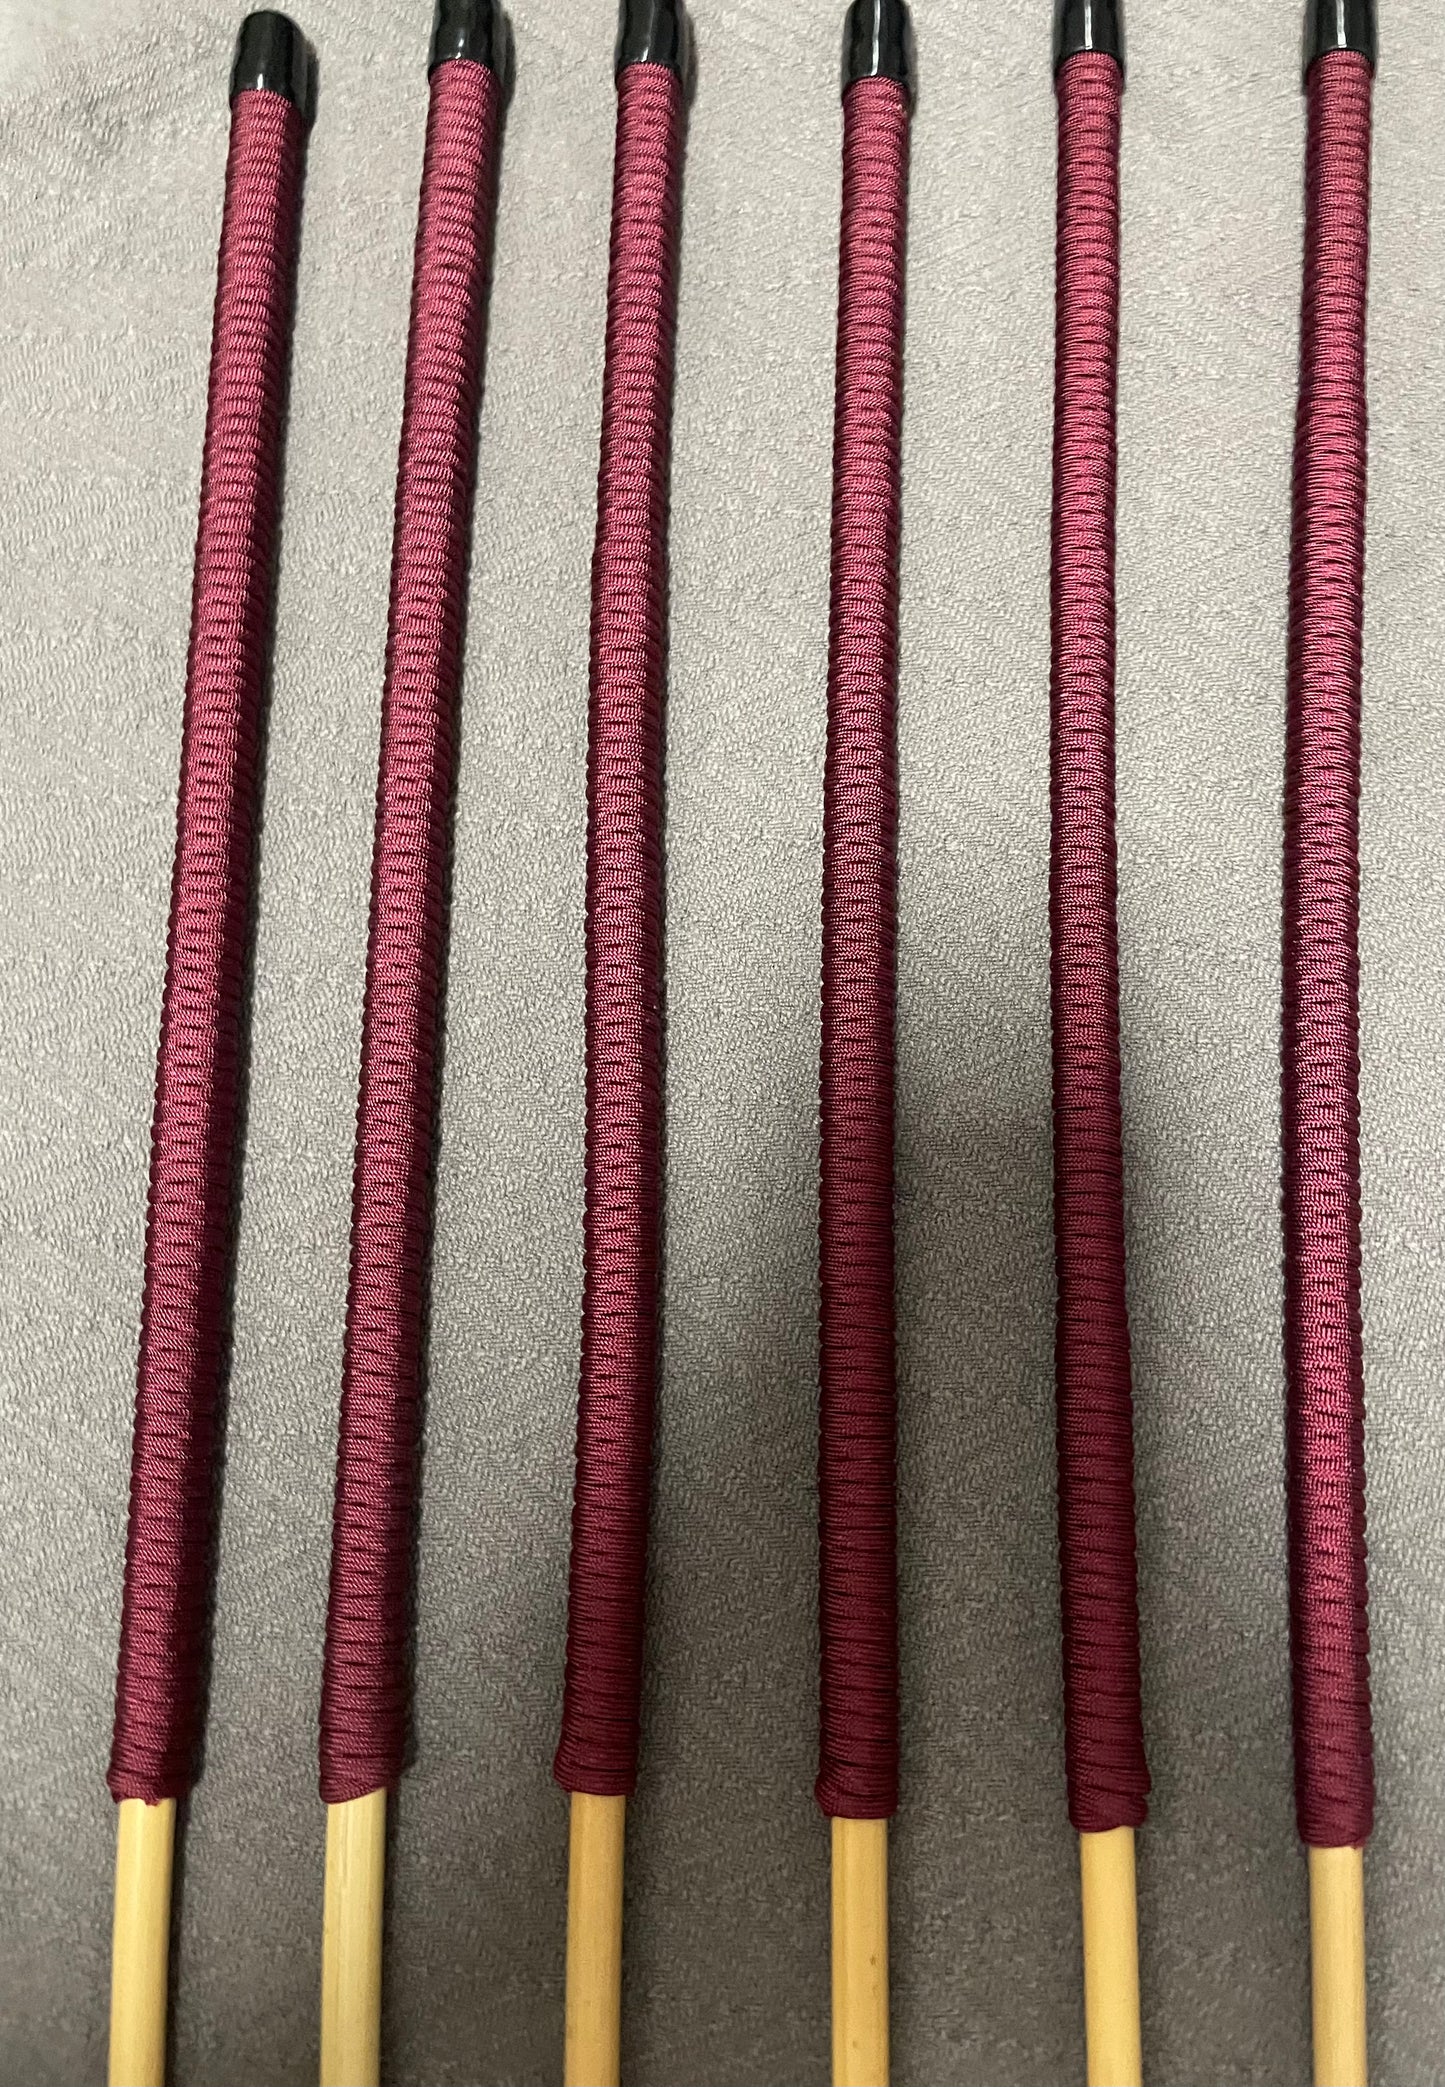 Thick and Thuddy Classic Dragon Canes / Whipping Canes / BDSM Canes Set of 6  - 115 cms Length - Burgundy Paracord Handles - Englishvice Canes